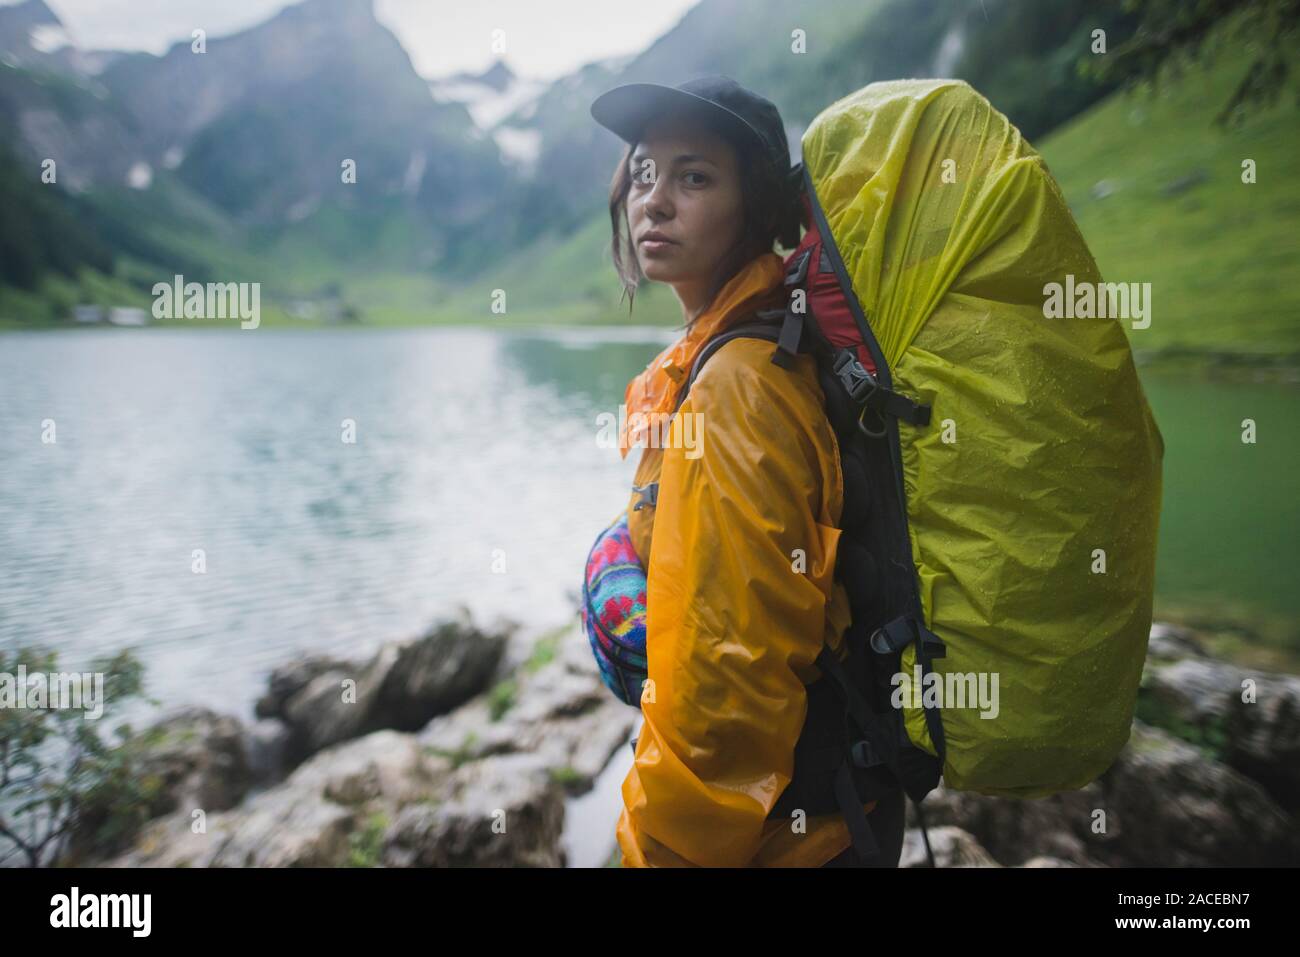 Woman wearing yellow backpack by Seealpsee lake in Appenzell Alps, Switzerland Stock Photo